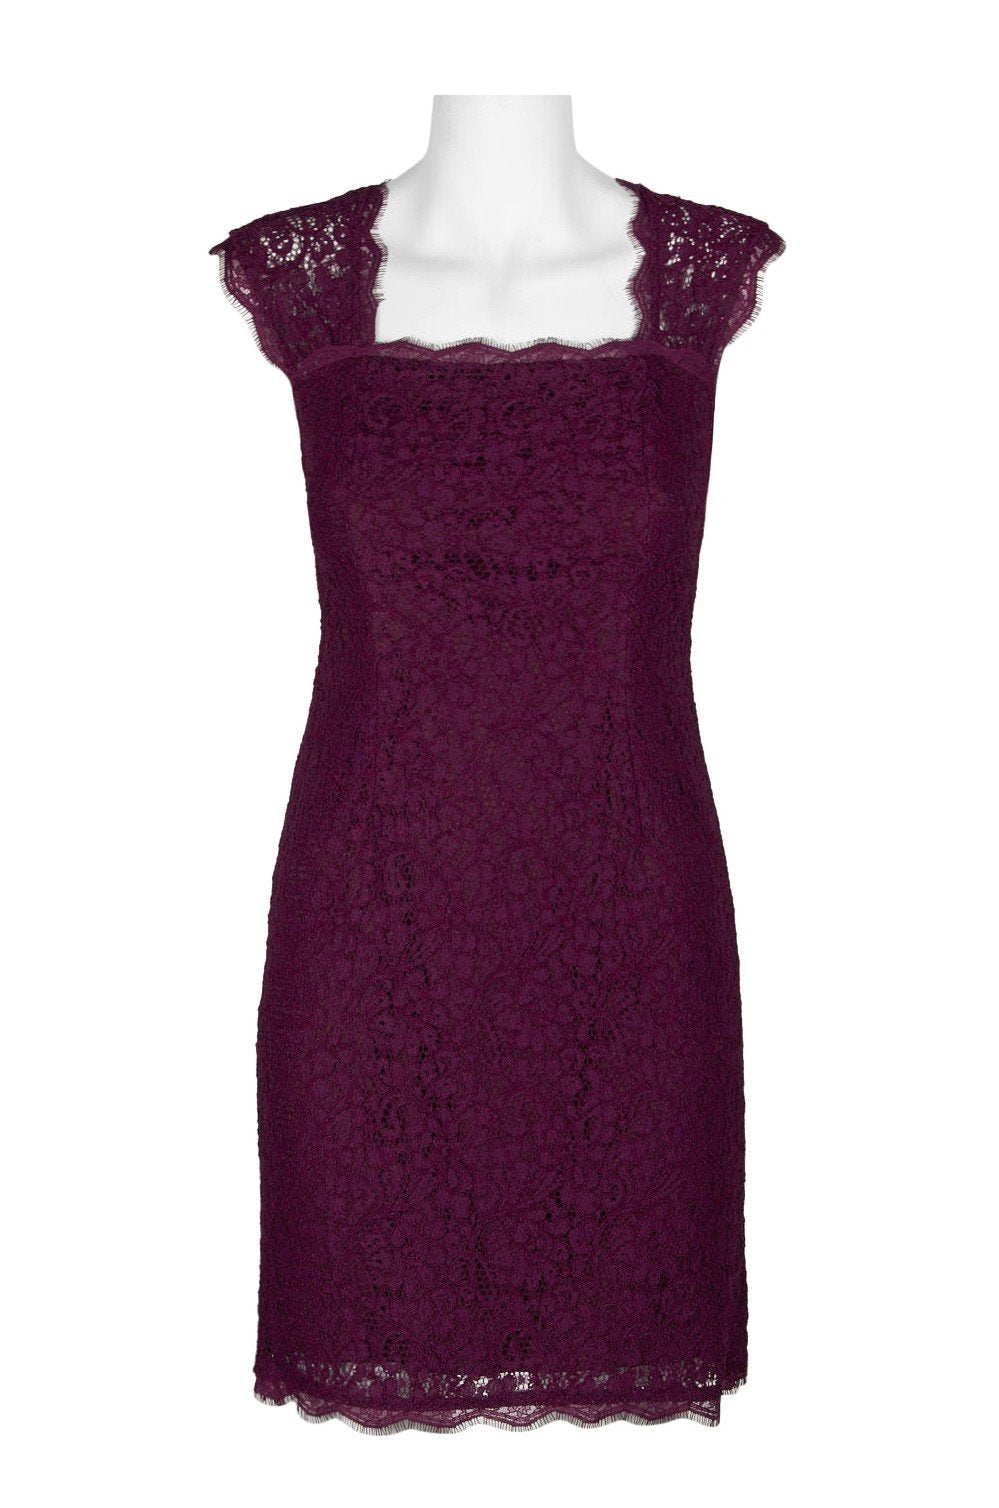 Adrianna Papell - 41895460 Floral Lace Square Neck Cutout Dress In Purple